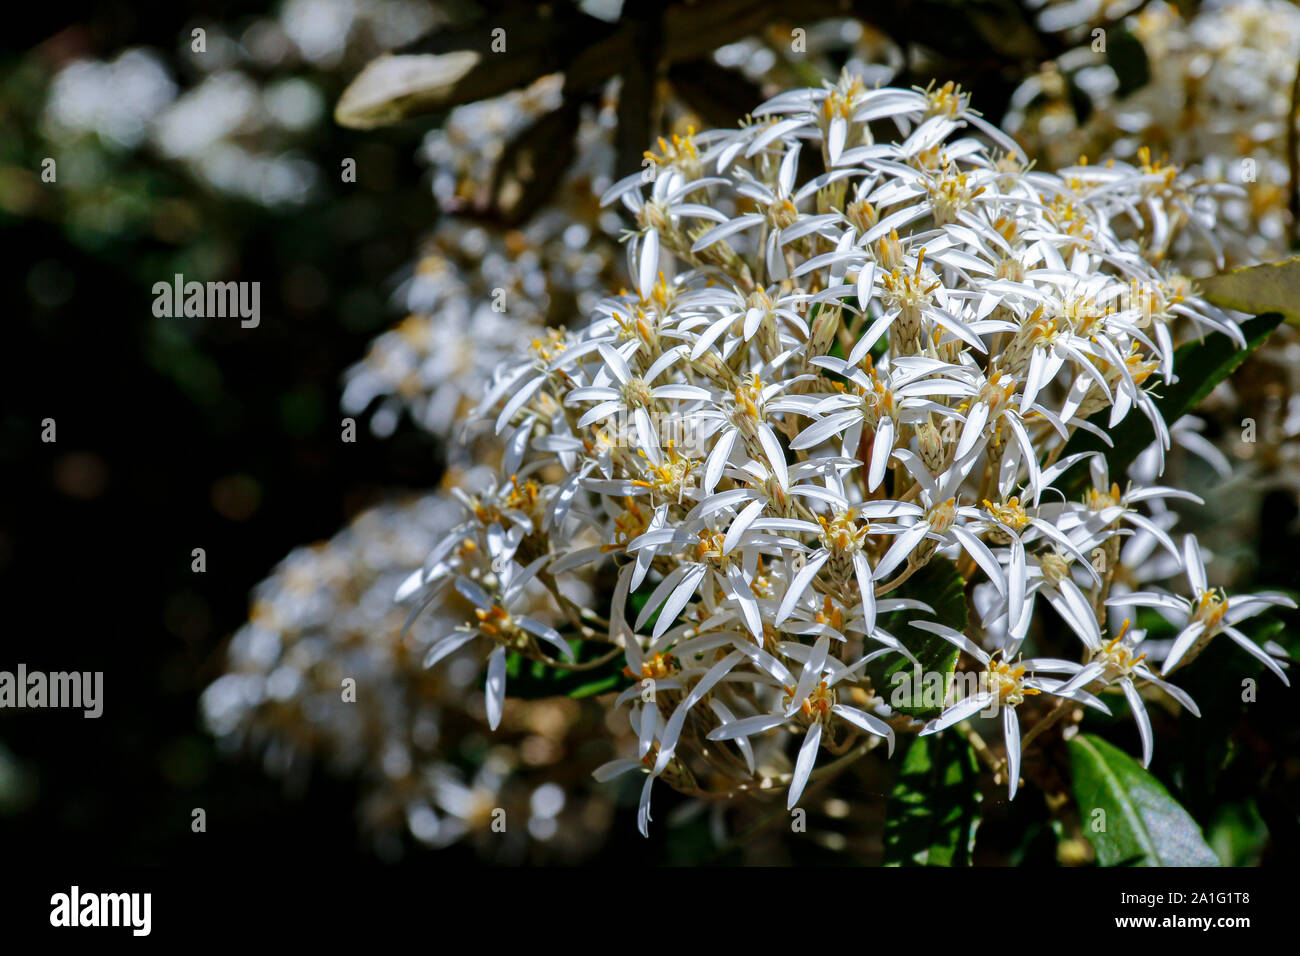 Close up of clusters of white flowers of Olearia rani (Daisy bush) Stock Photo